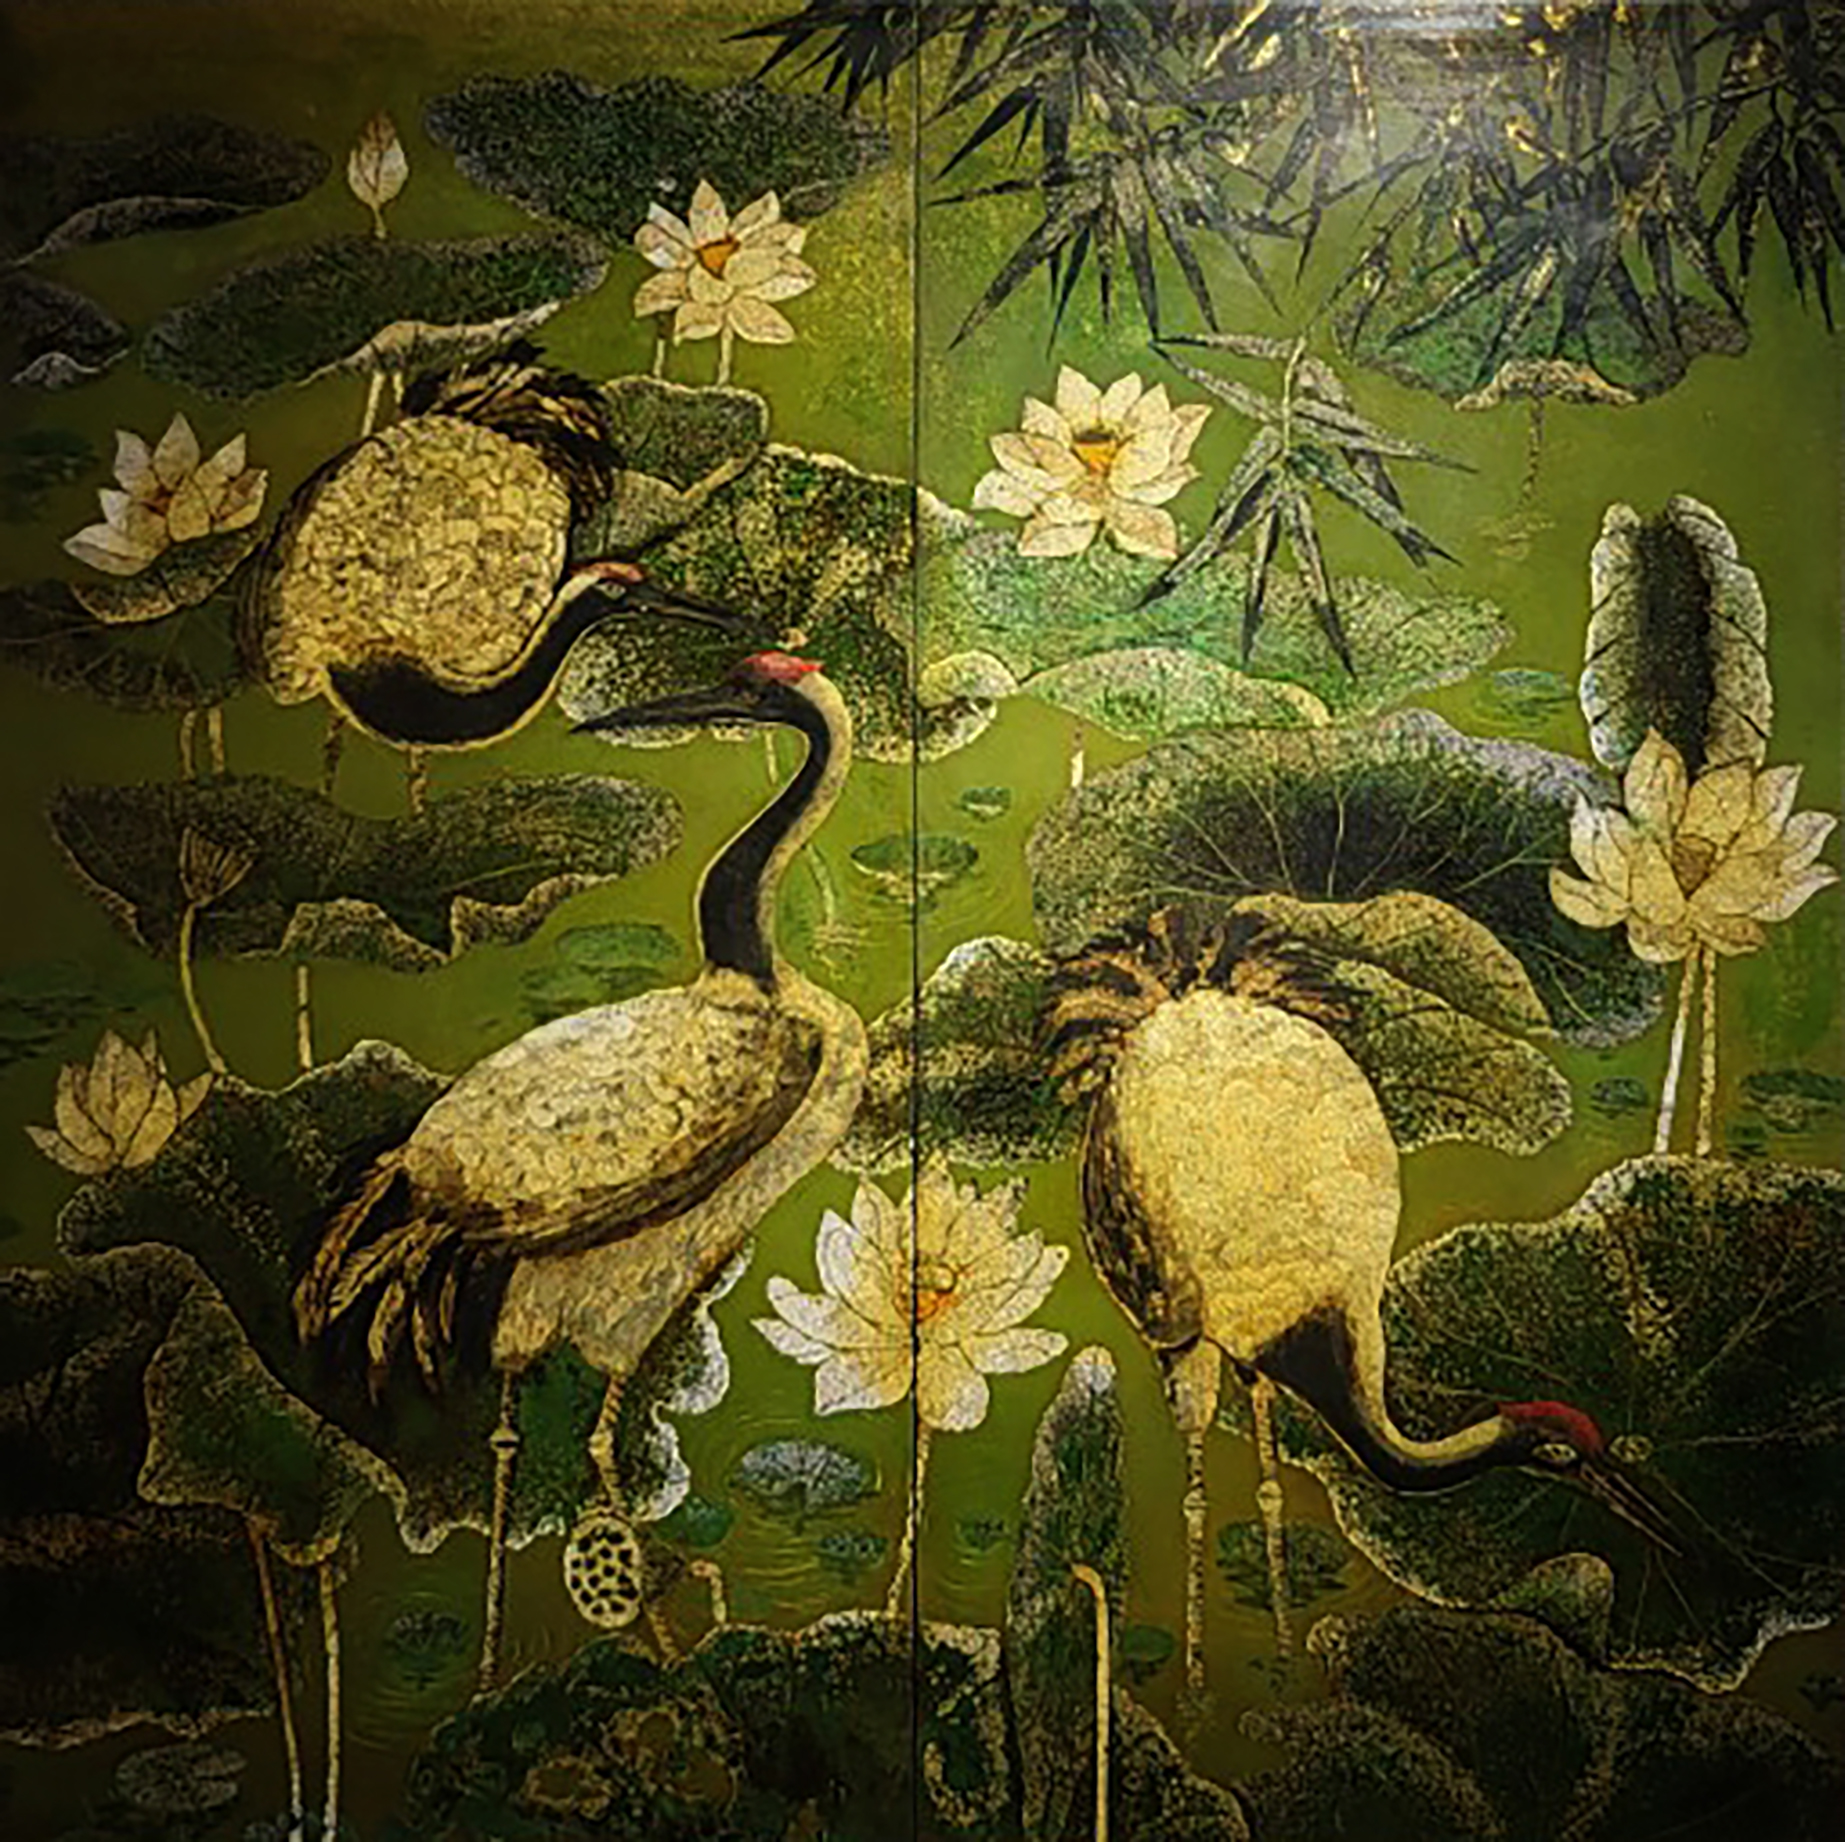 The 'Sen Va Co' (Lotuses and Storks) by painter Pham Minh Sang